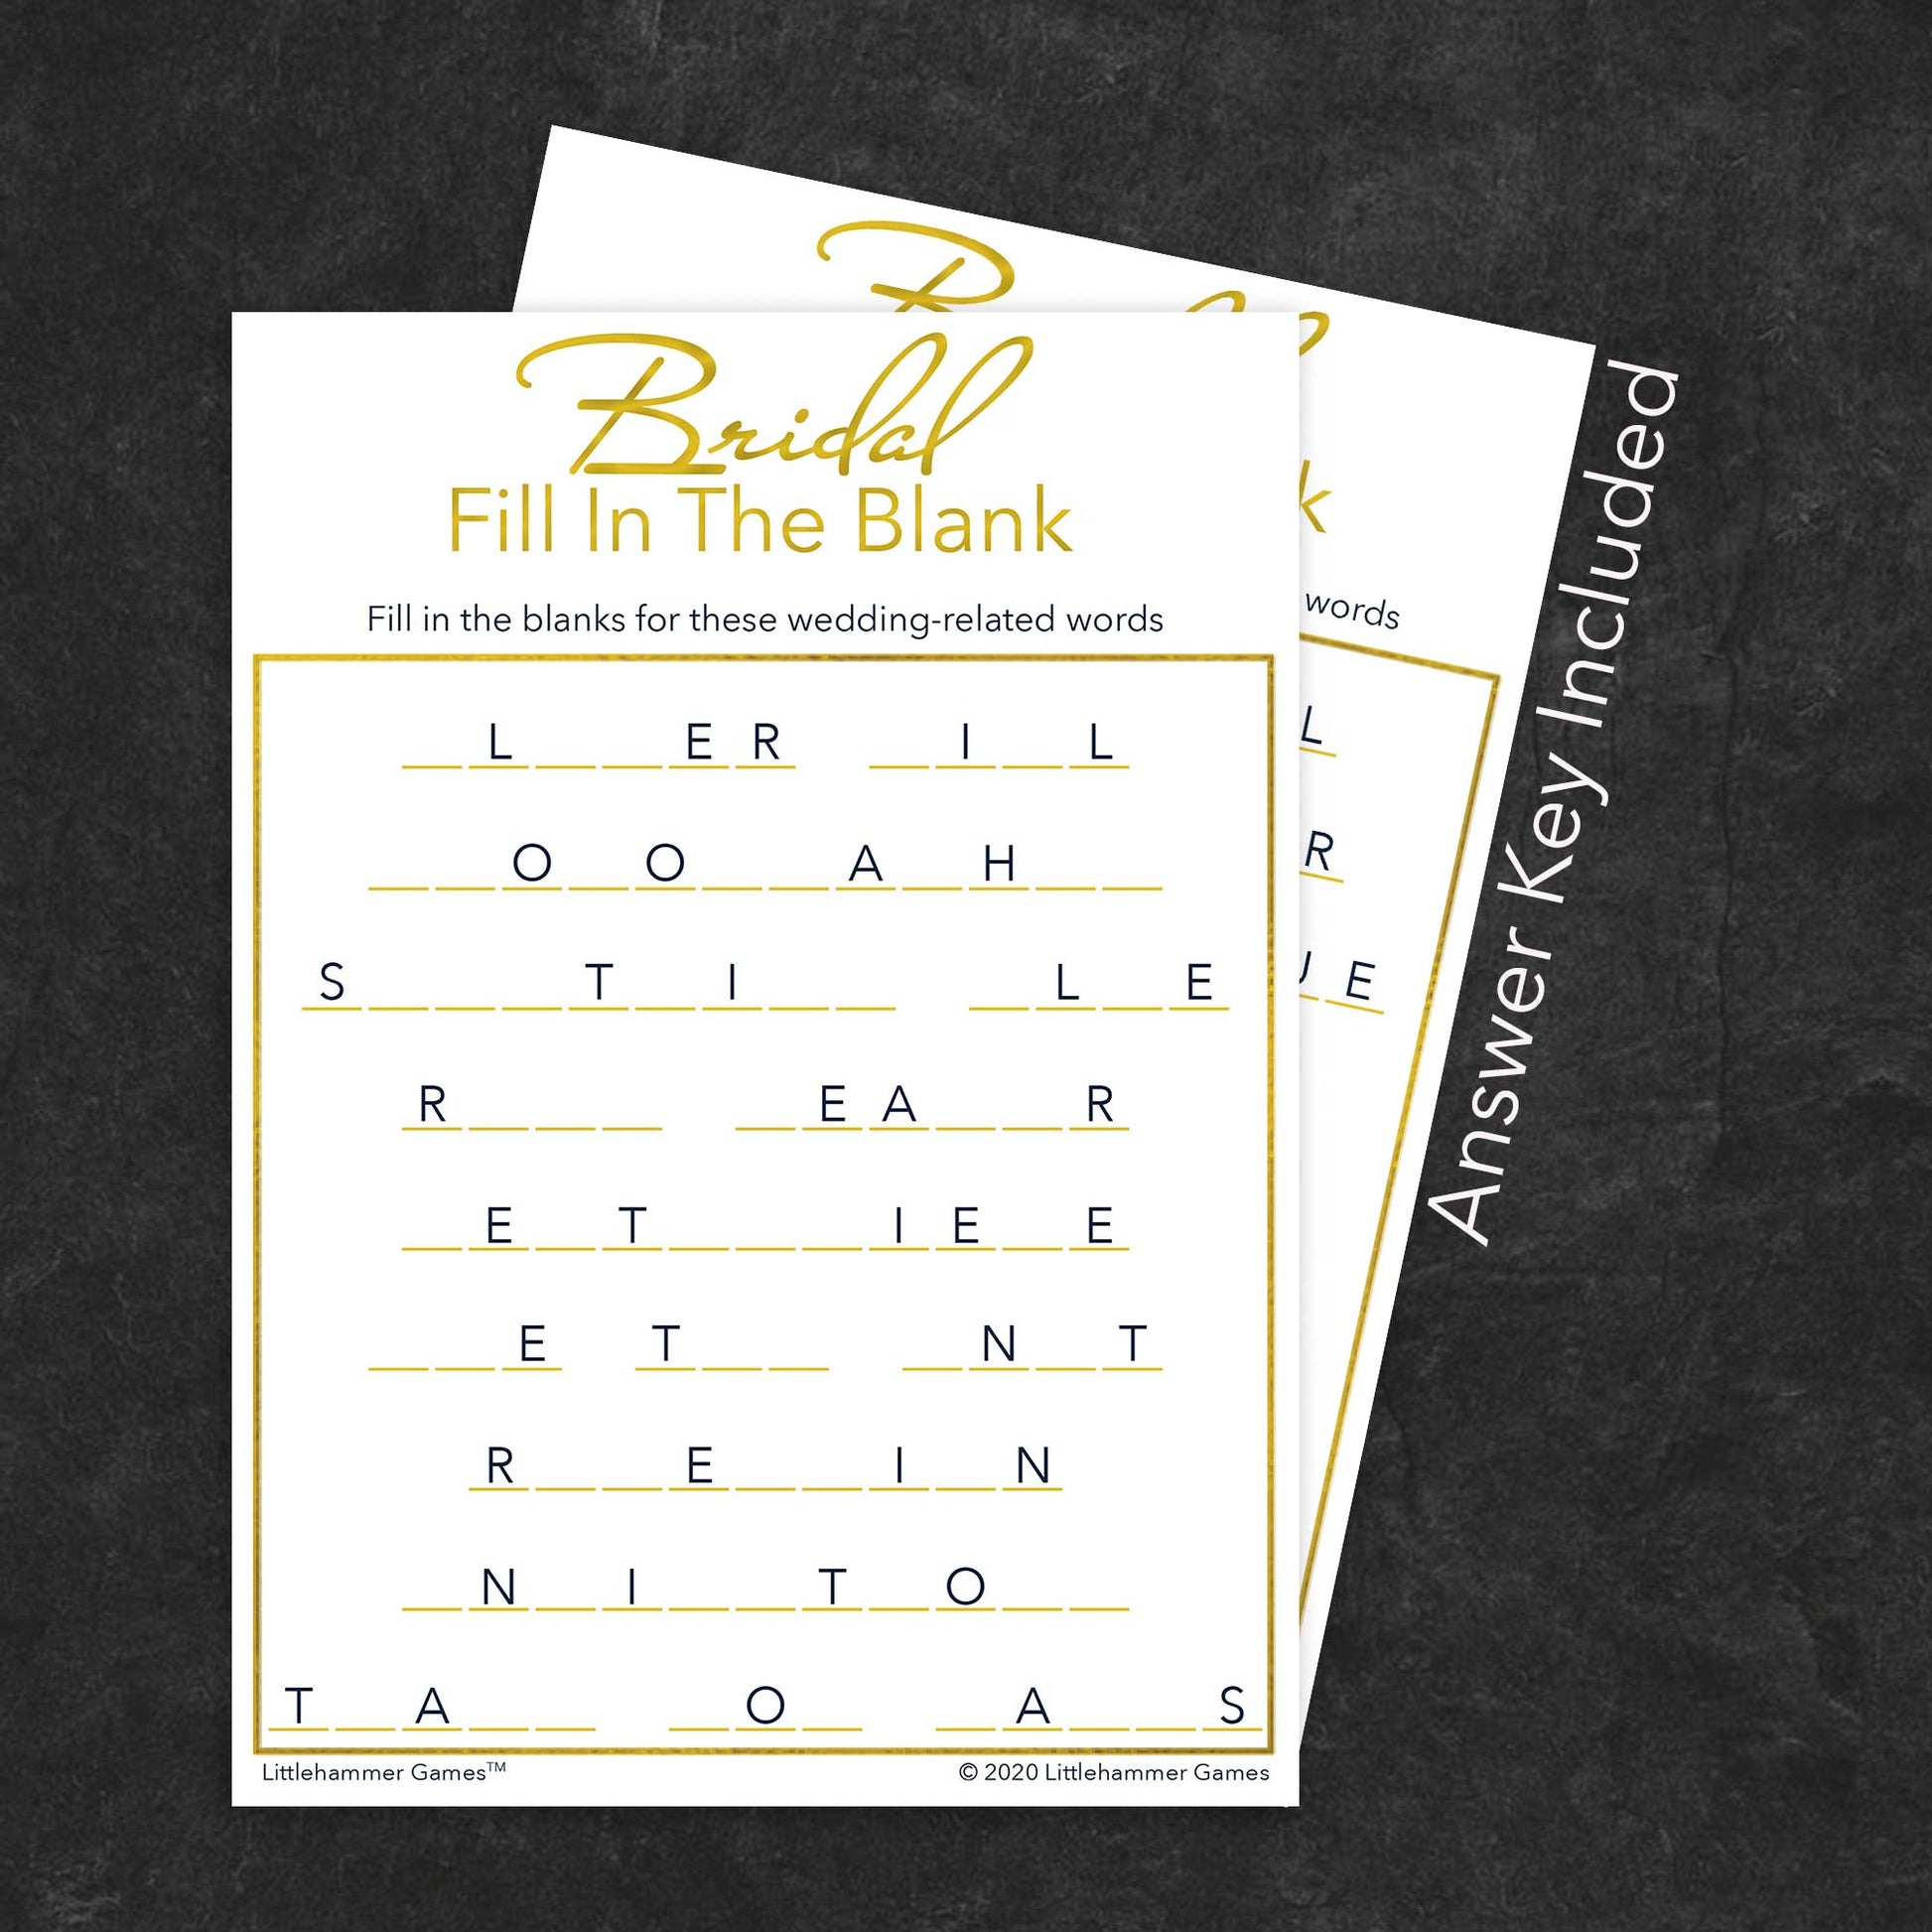 Bridal Fill in the Blank game card with a gold and white background with answer card tucked behind it on a slate background with white text that says "Answer Key Included"